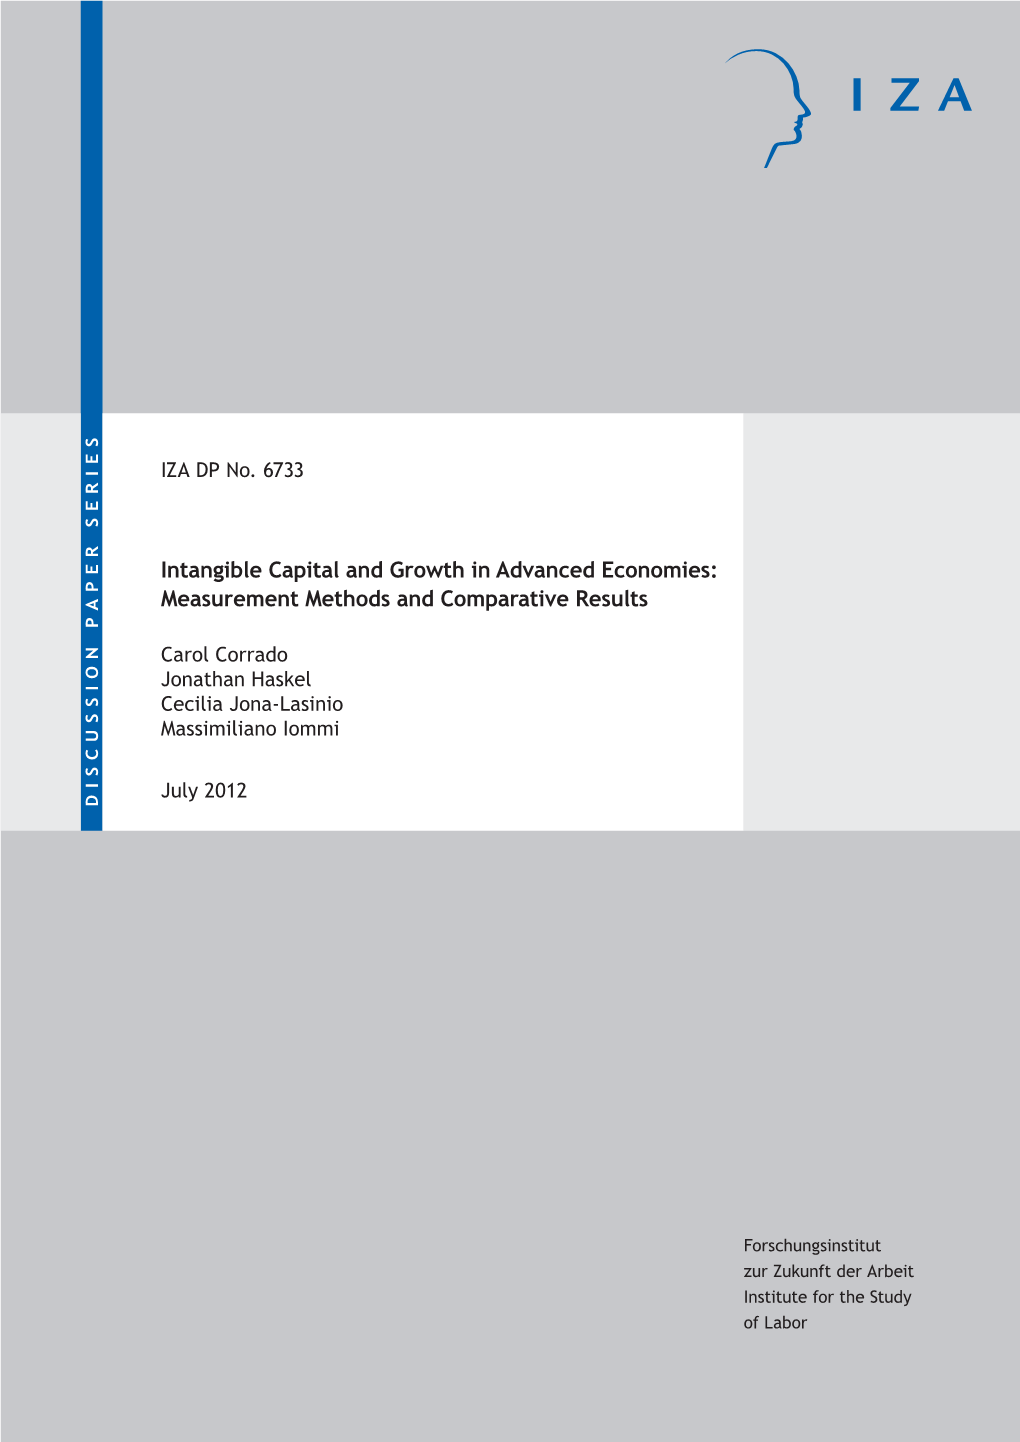 Intangible Capital and Growth in Advanced Economies: Measurement Methods and Comparative Results